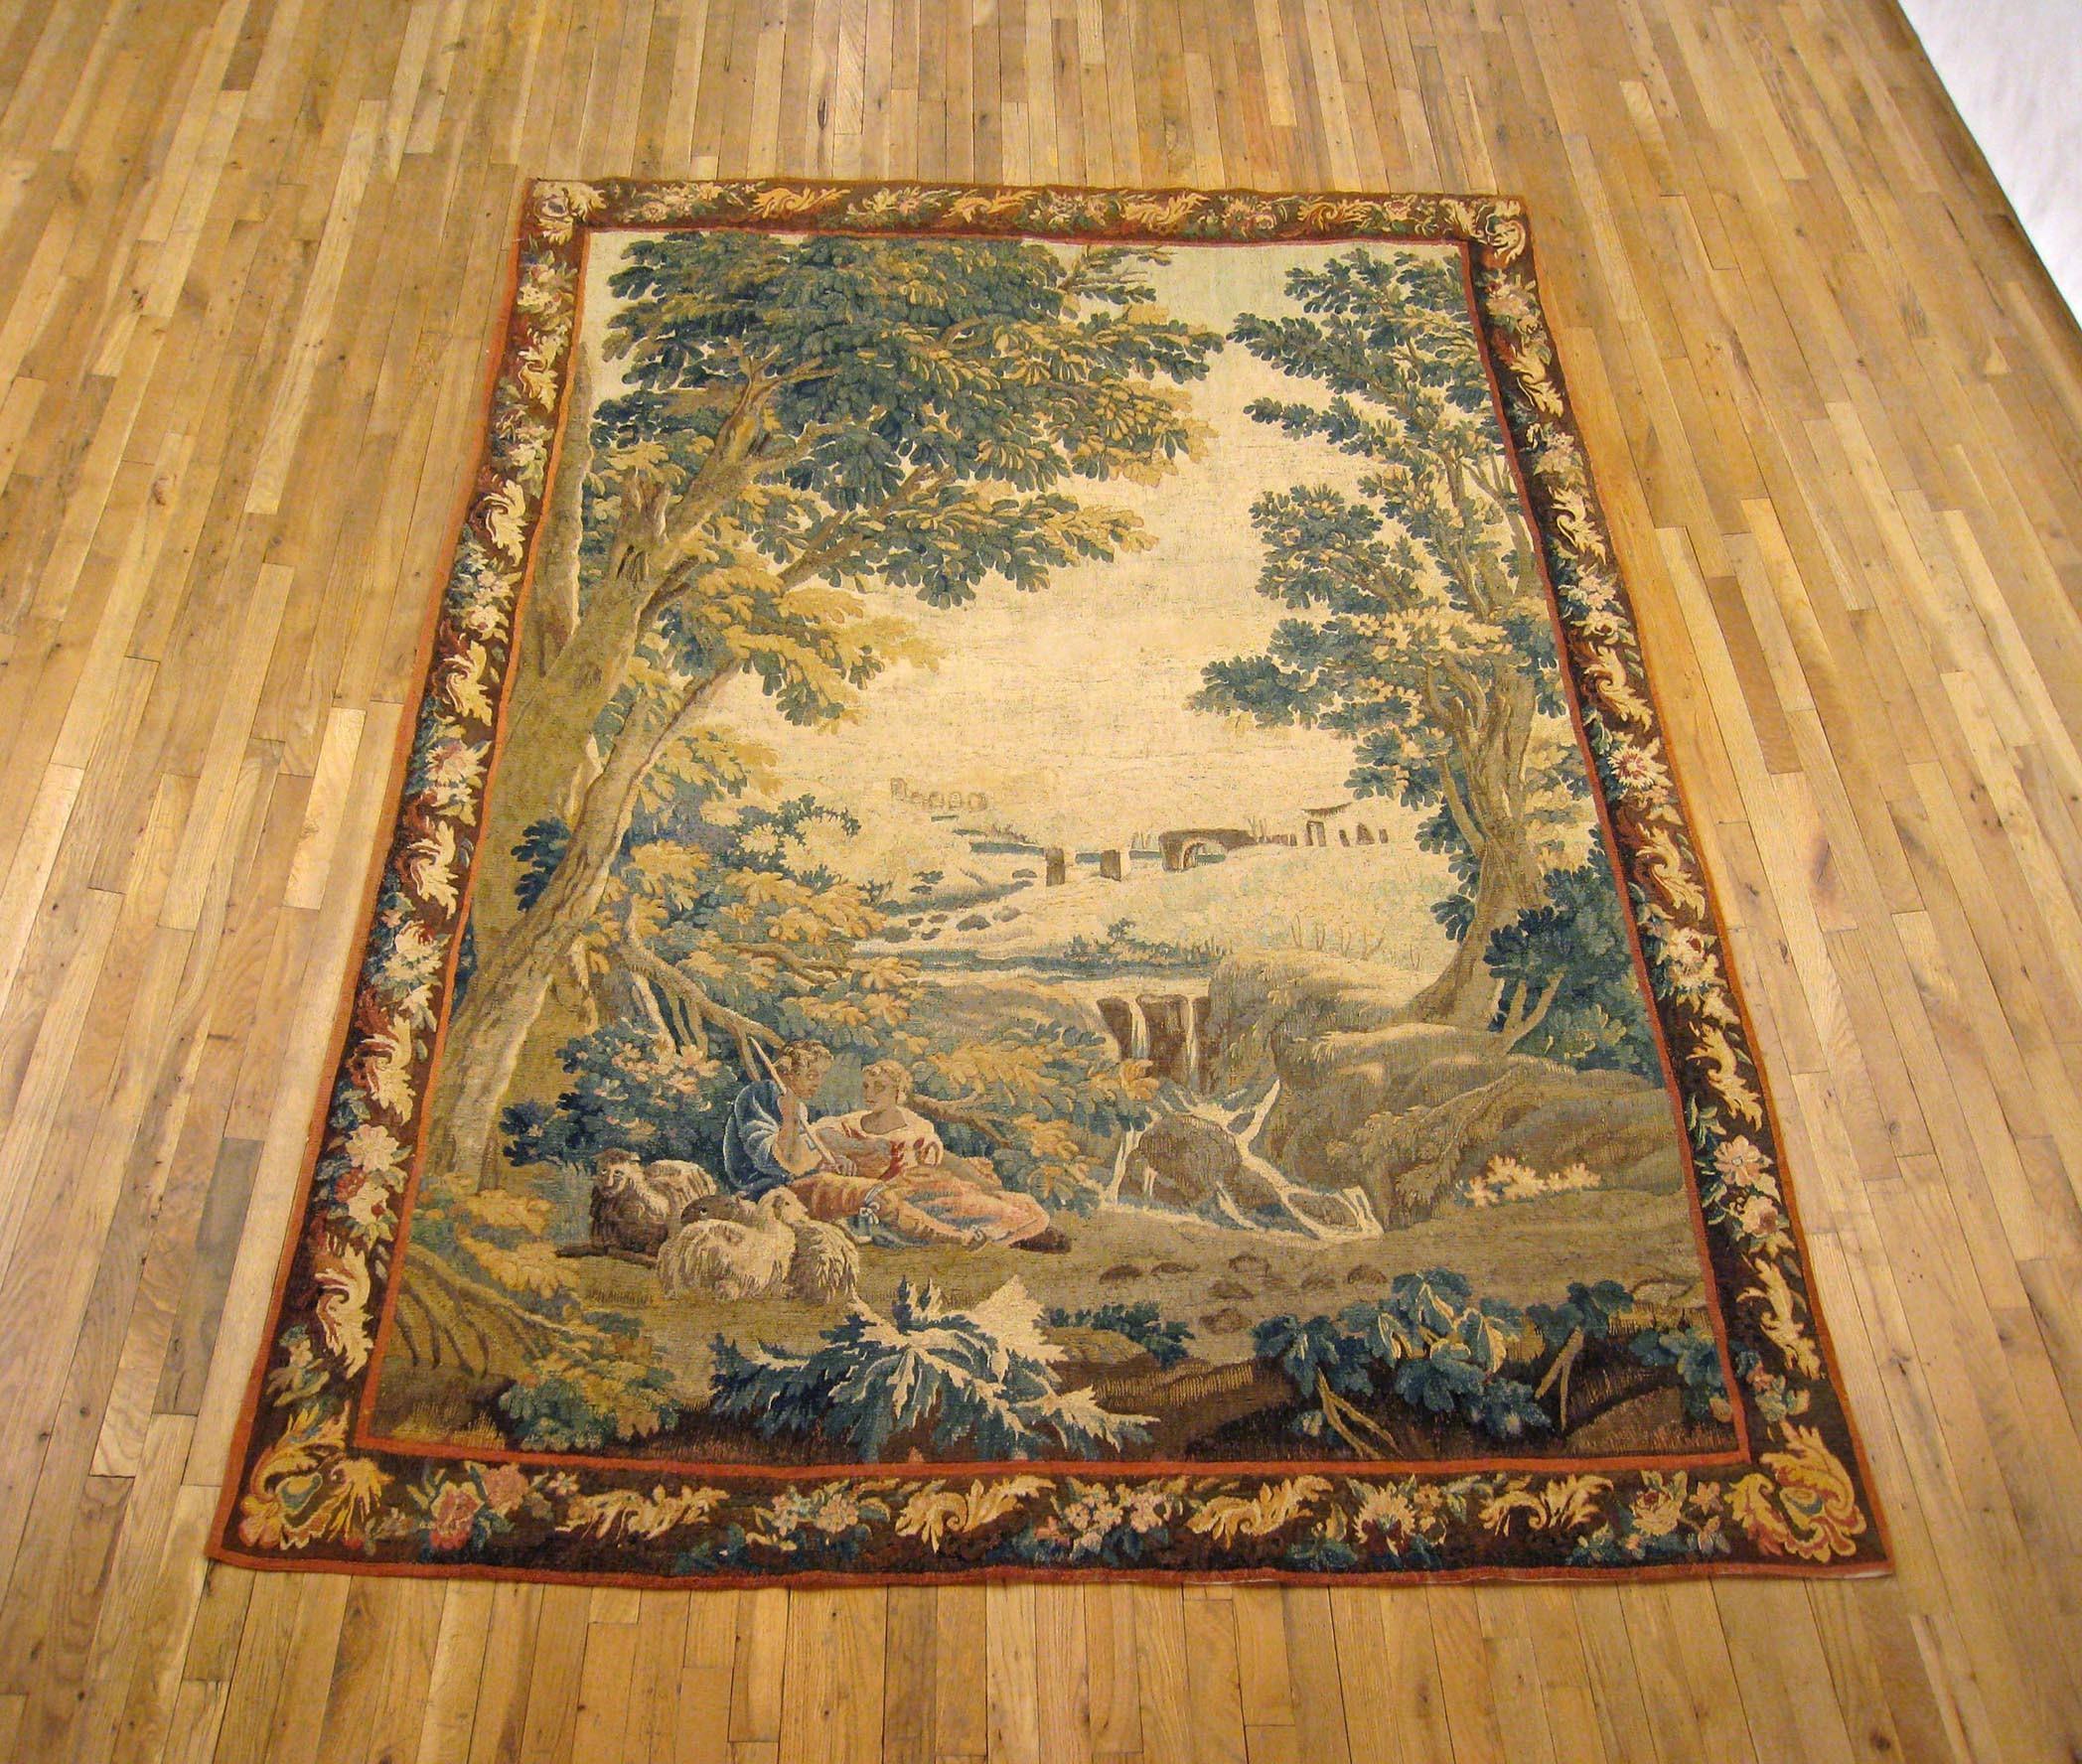 A French pastoral landscape tapestry from the 18th century, depicting a placid country scene with a young couple conversing and tending to their flock of sheep amidst the beauty and tranquility of the verdant landscape, and a murmuring brook flowing